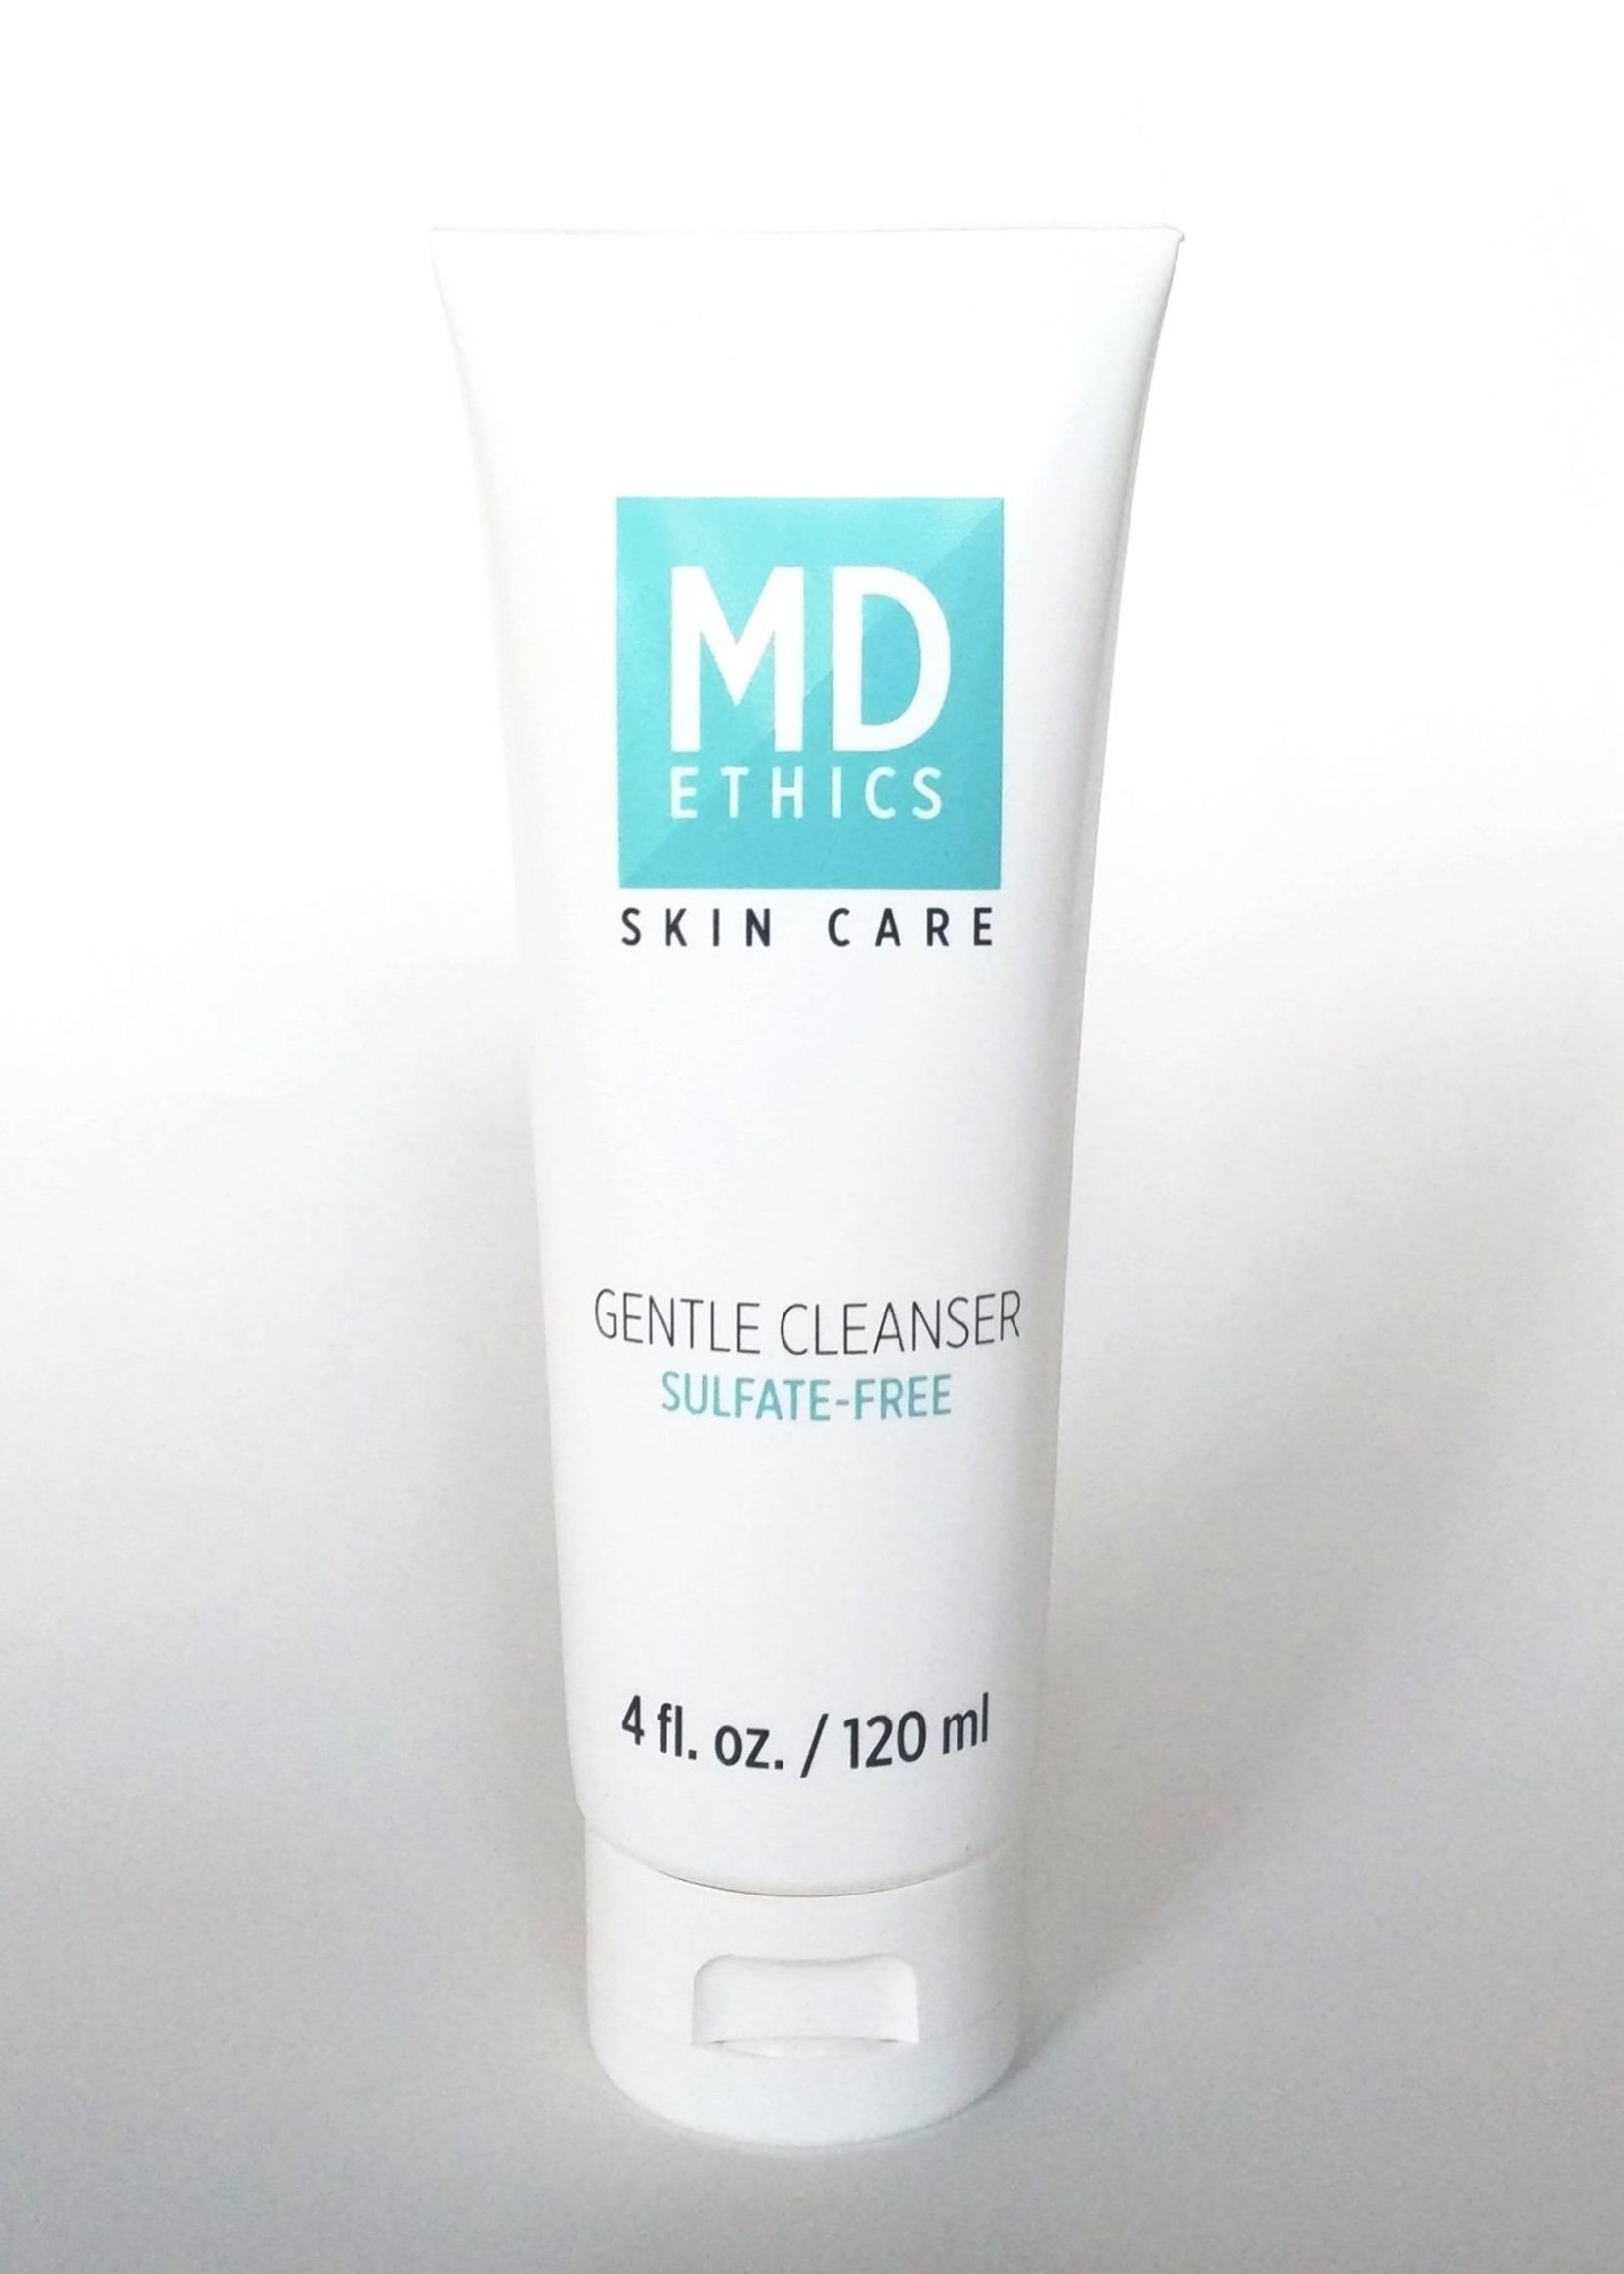 MD Ethics Gentle Cleanser